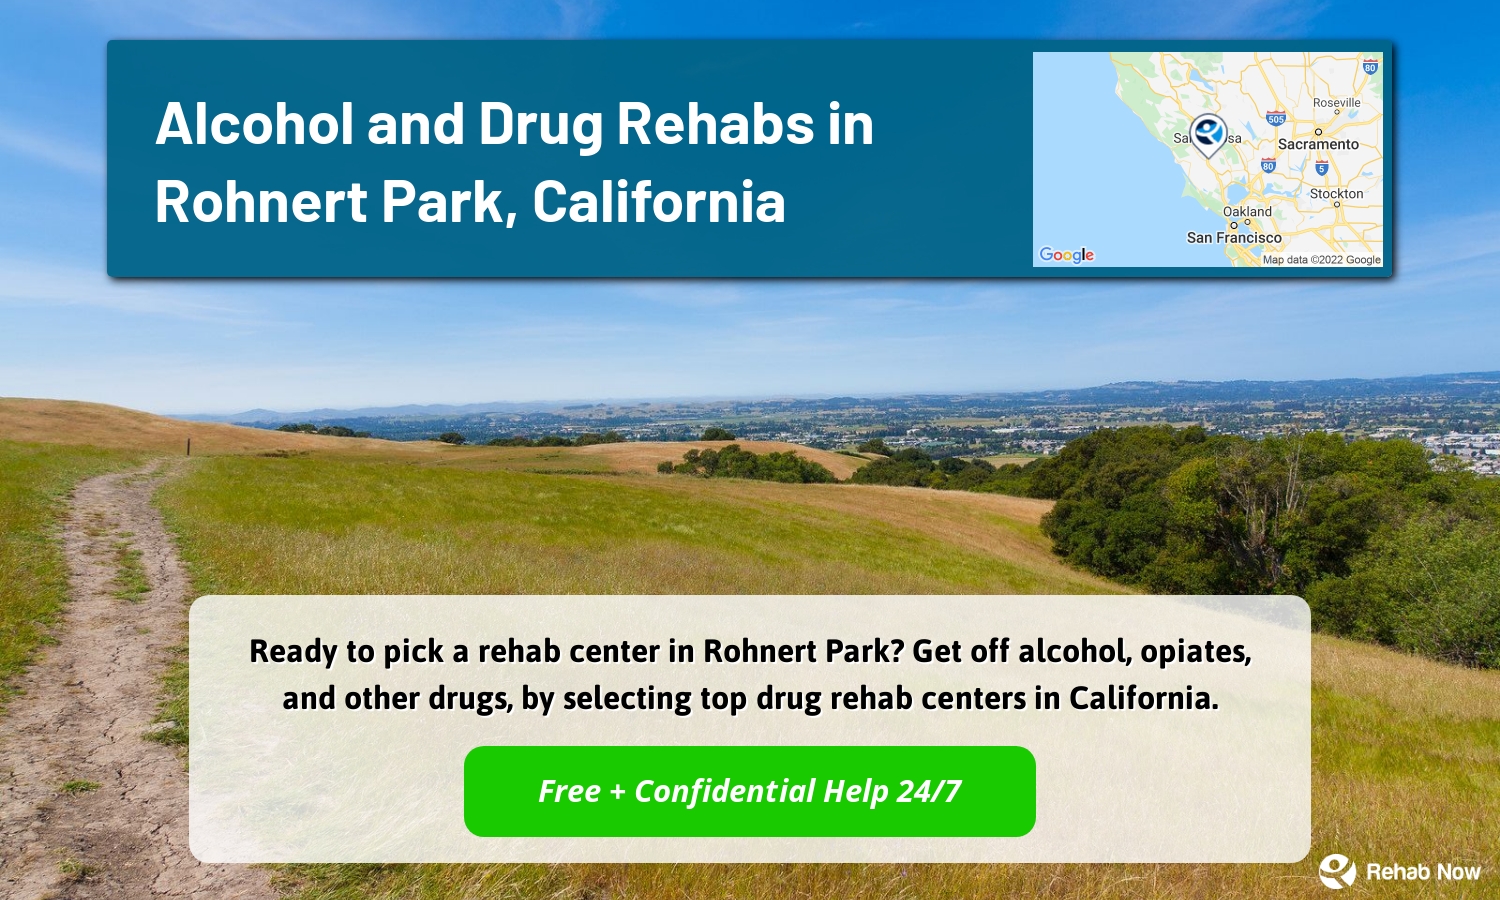 Ready to pick a rehab center in Rohnert Park? Get off alcohol, opiates, and other drugs, by selecting top drug rehab centers in California.